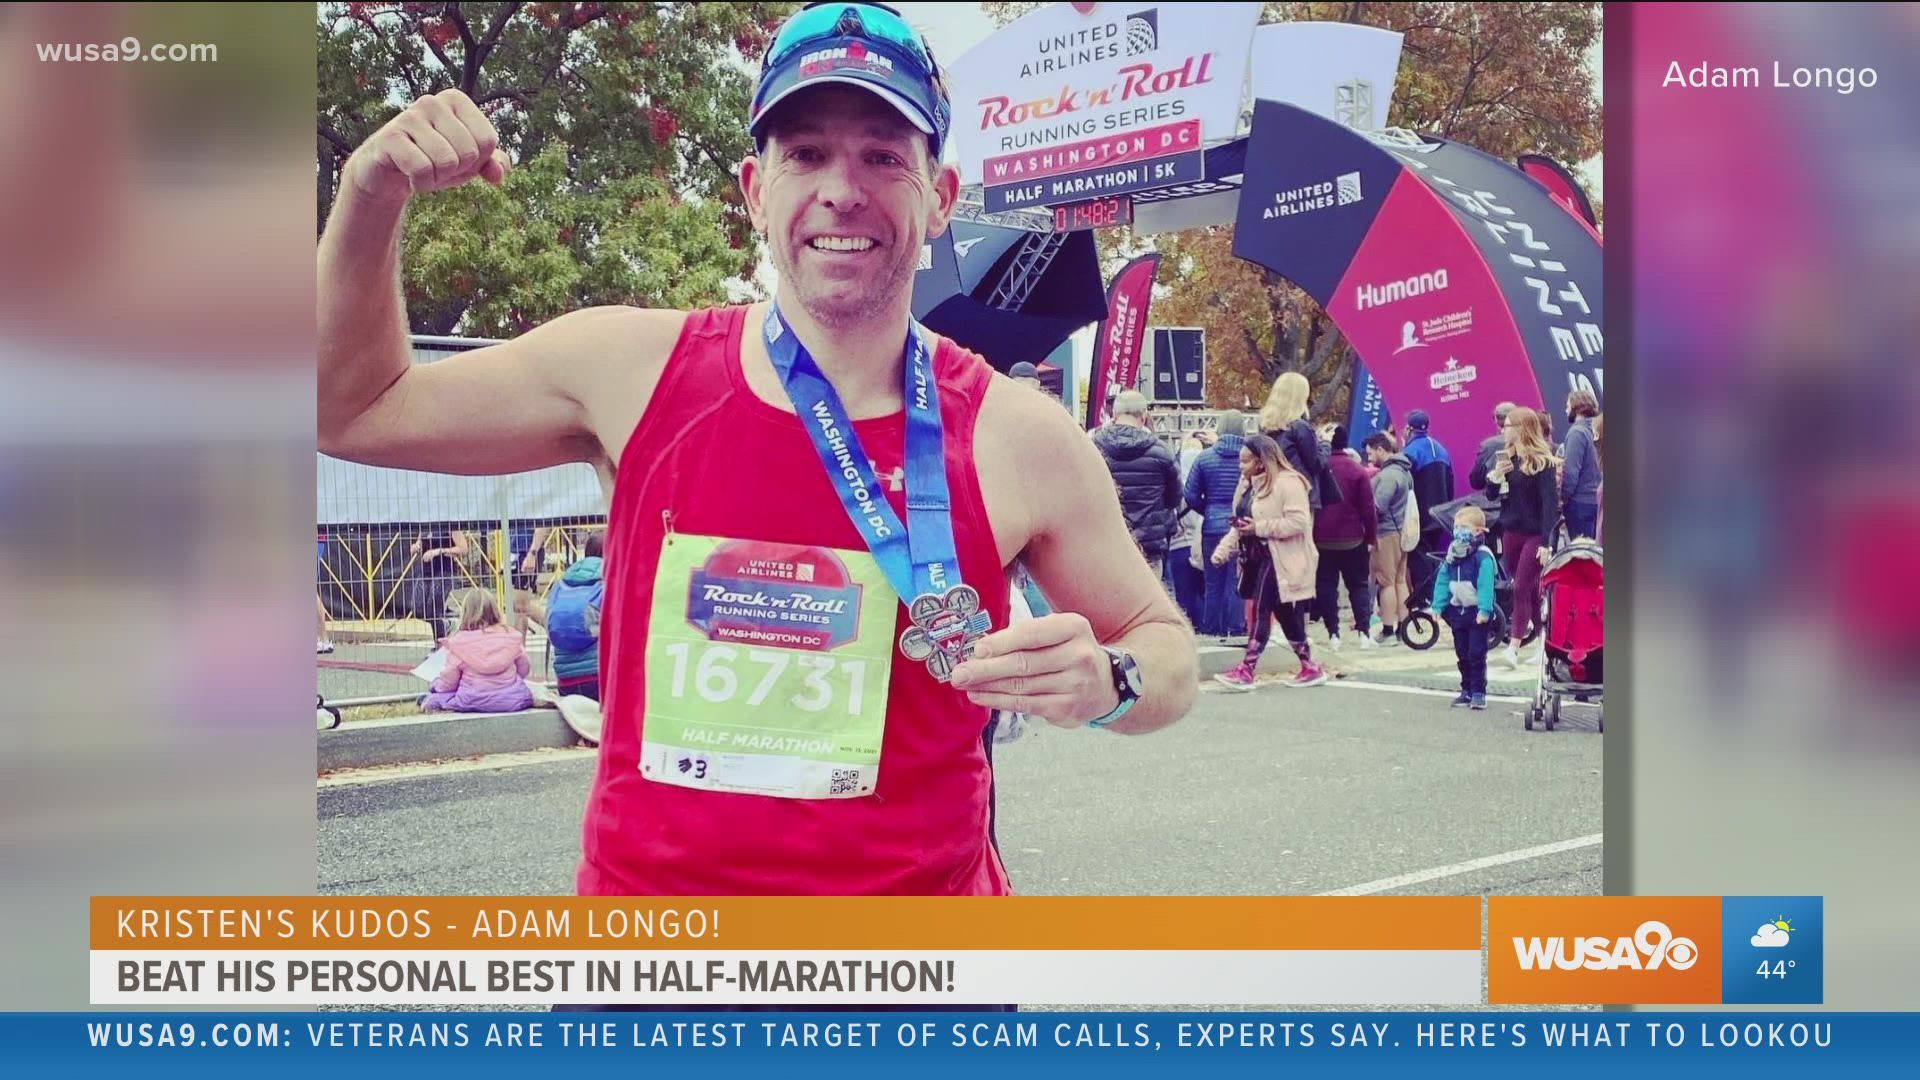 WUSA9 Anchor, Adam Longo, deserves a big shoutout for finishing 10th in his age group and beating his personal record at the Rock N' Roll Half-marathon.